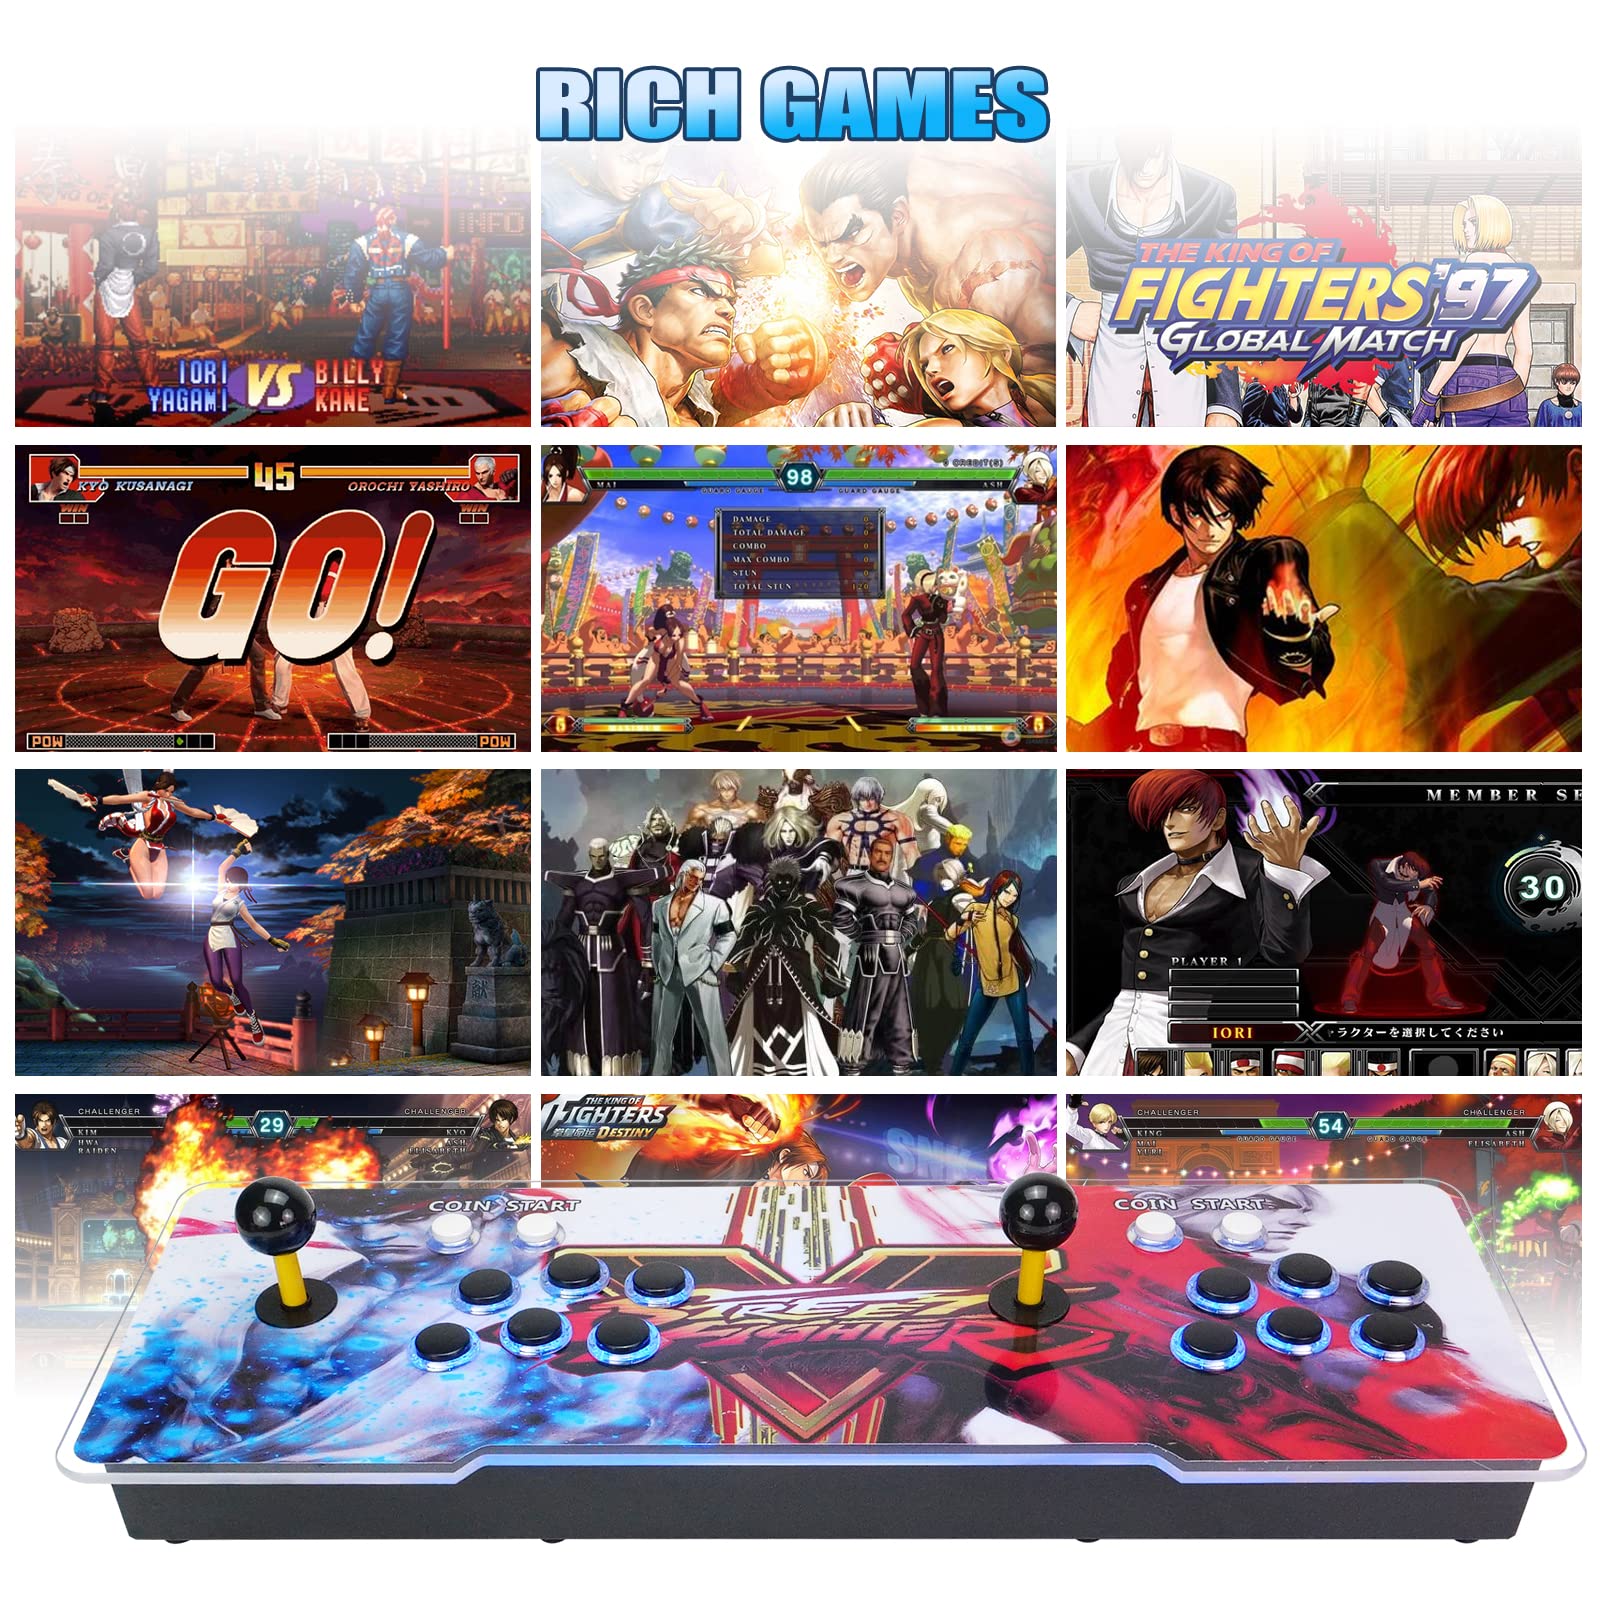 Buy 3D Arcade Game Console 3800 Games Installed, Search Games, Support 44  3D Games, 1280x720P, Favorite List, Players Online Game, Player Game  Controls,Rocker Retro Fado168